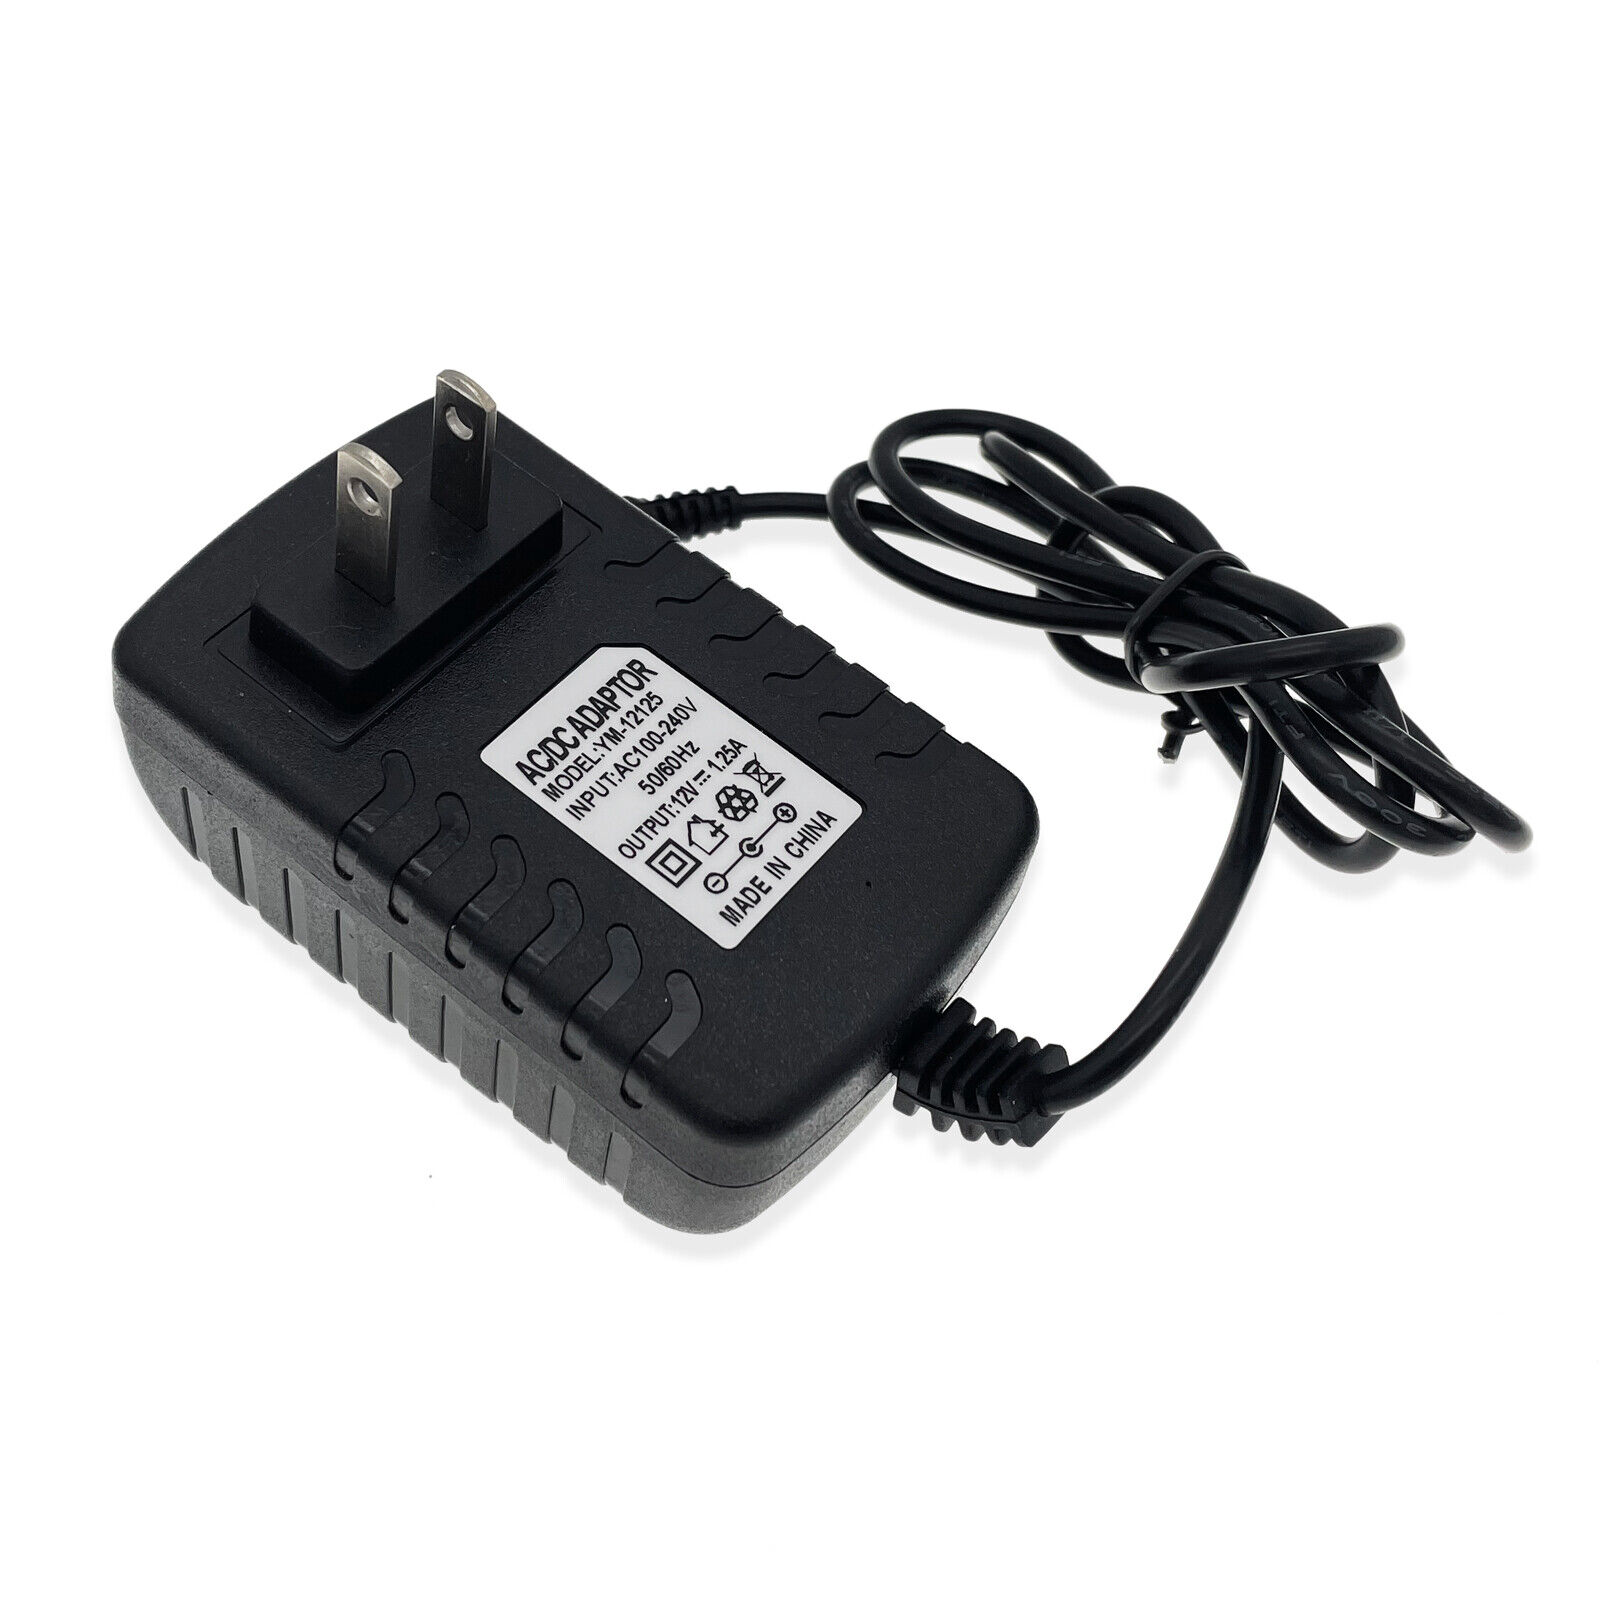 15W Power Supply Adapter for Amazon Echo Dot (3rd Gen) Echo Show 5 Cord Charger